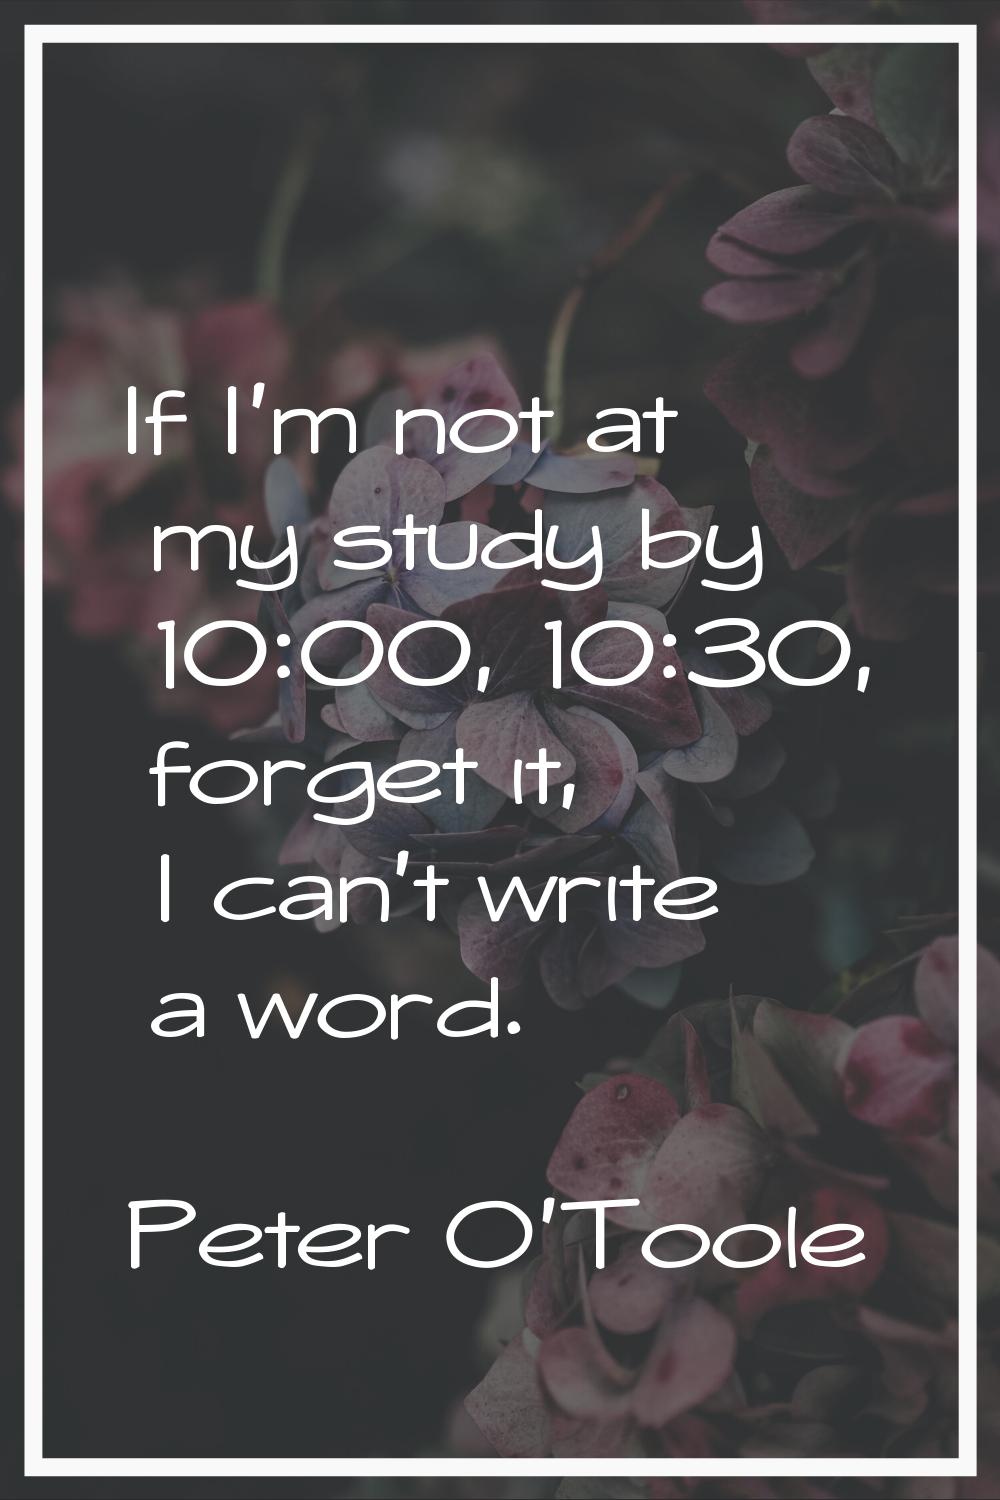 If I'm not at my study by 10:00, 10:30, forget it, I can't write a word.